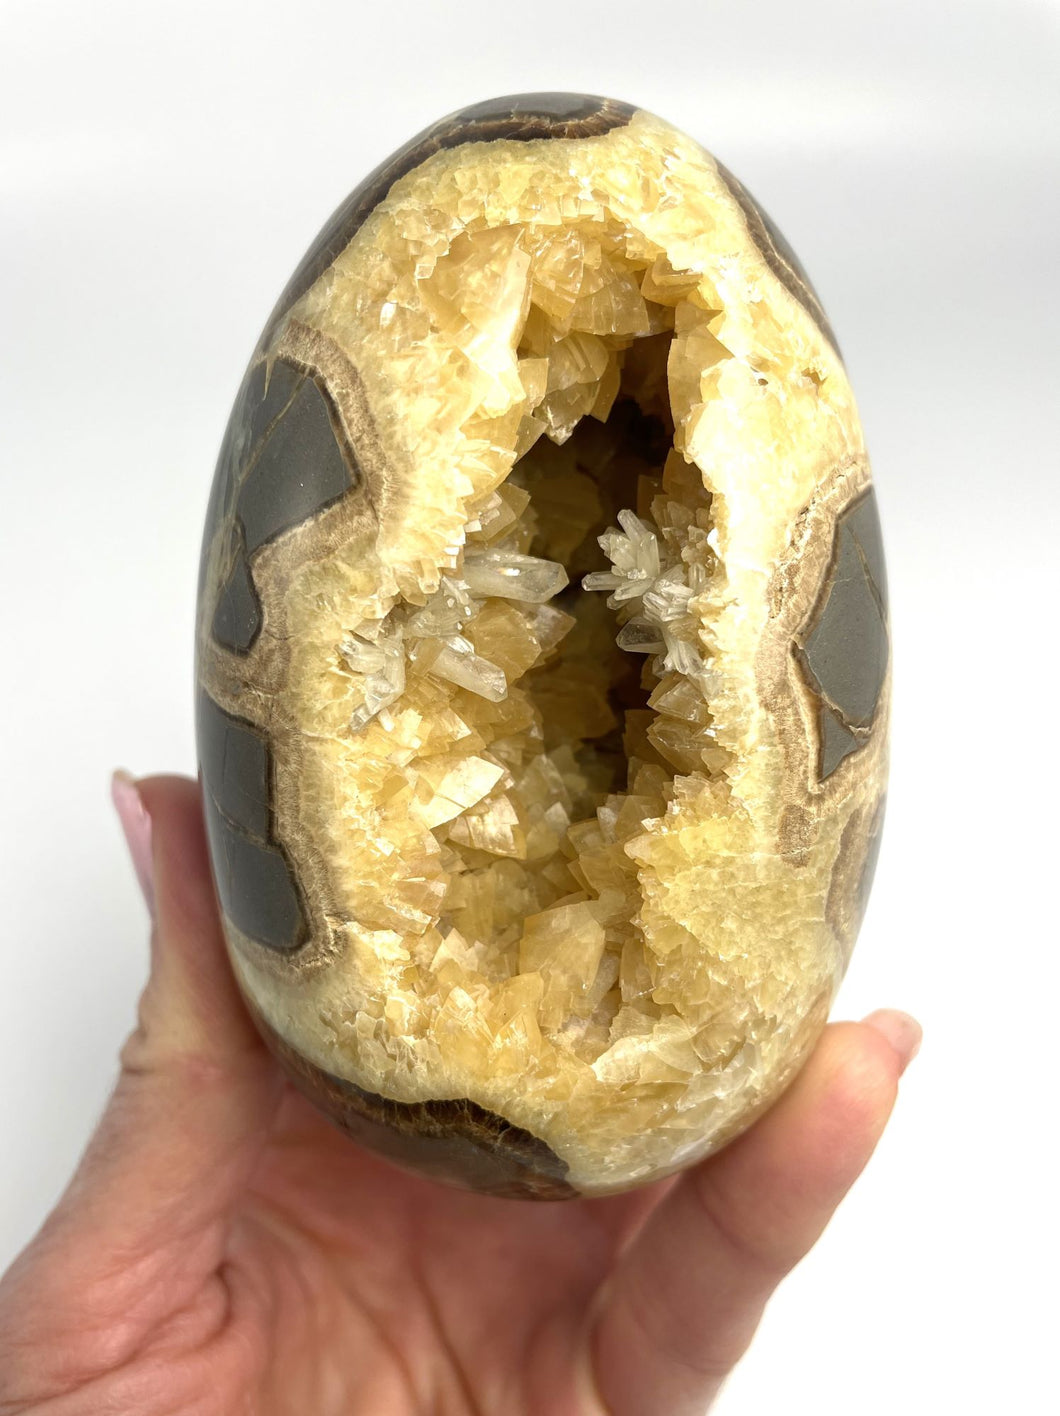 Septarian Egg with rare barite crystal structures